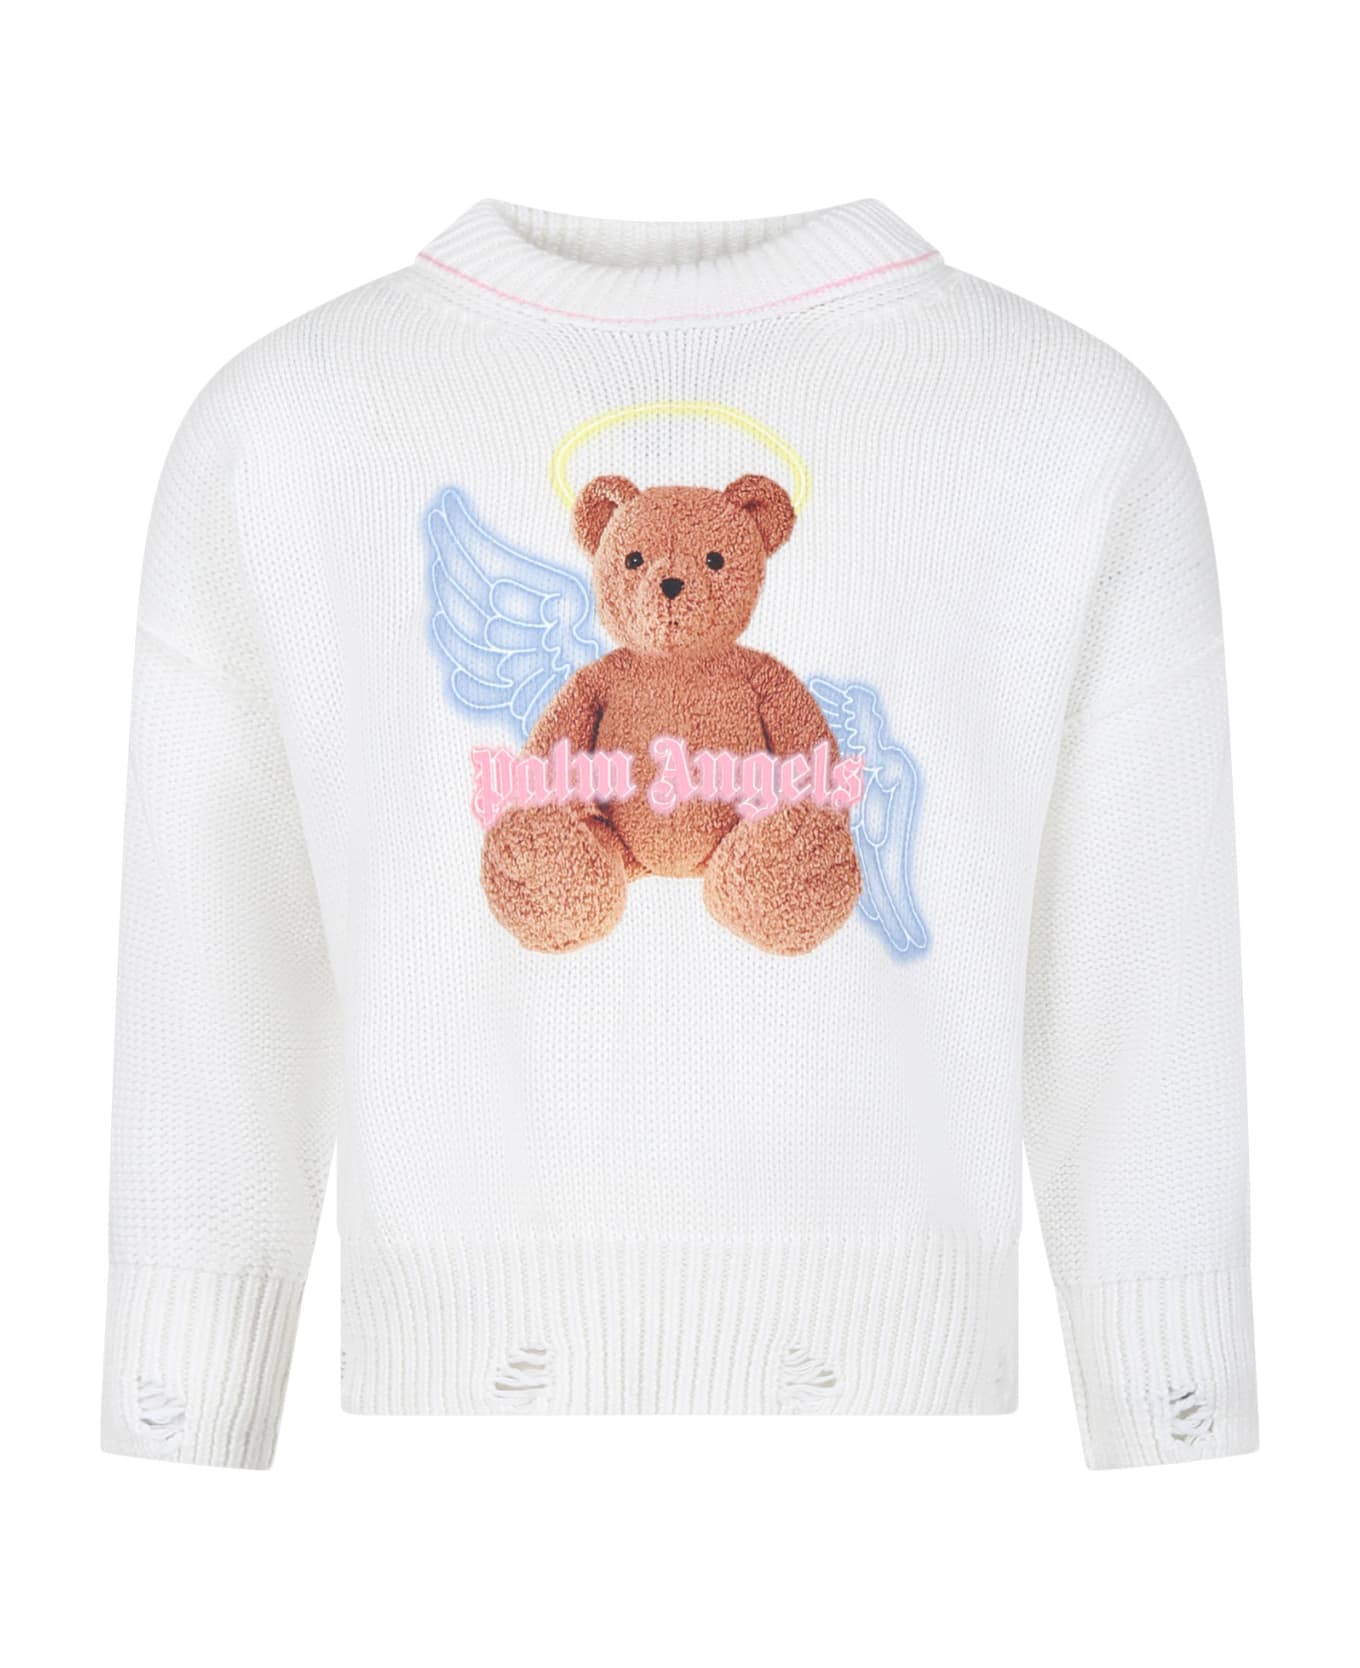 Palm Angels White Sweater For Girl With Iconic Teddy Bear - White